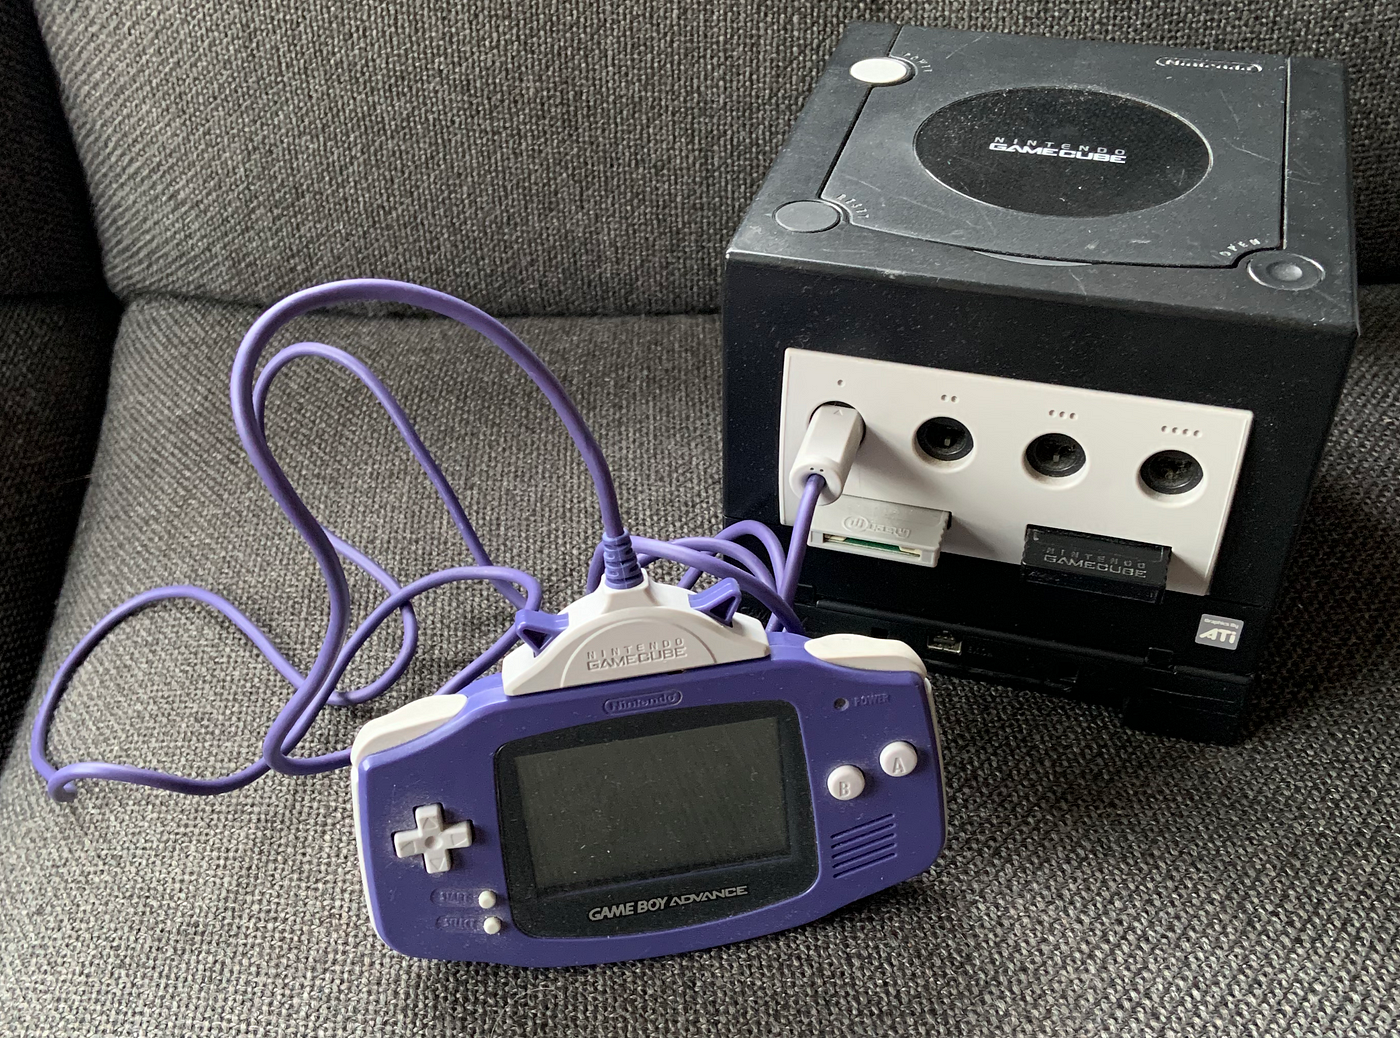 with 11,000 kilometre-long Game Boy Advance link | by Cariad Keigher Medium